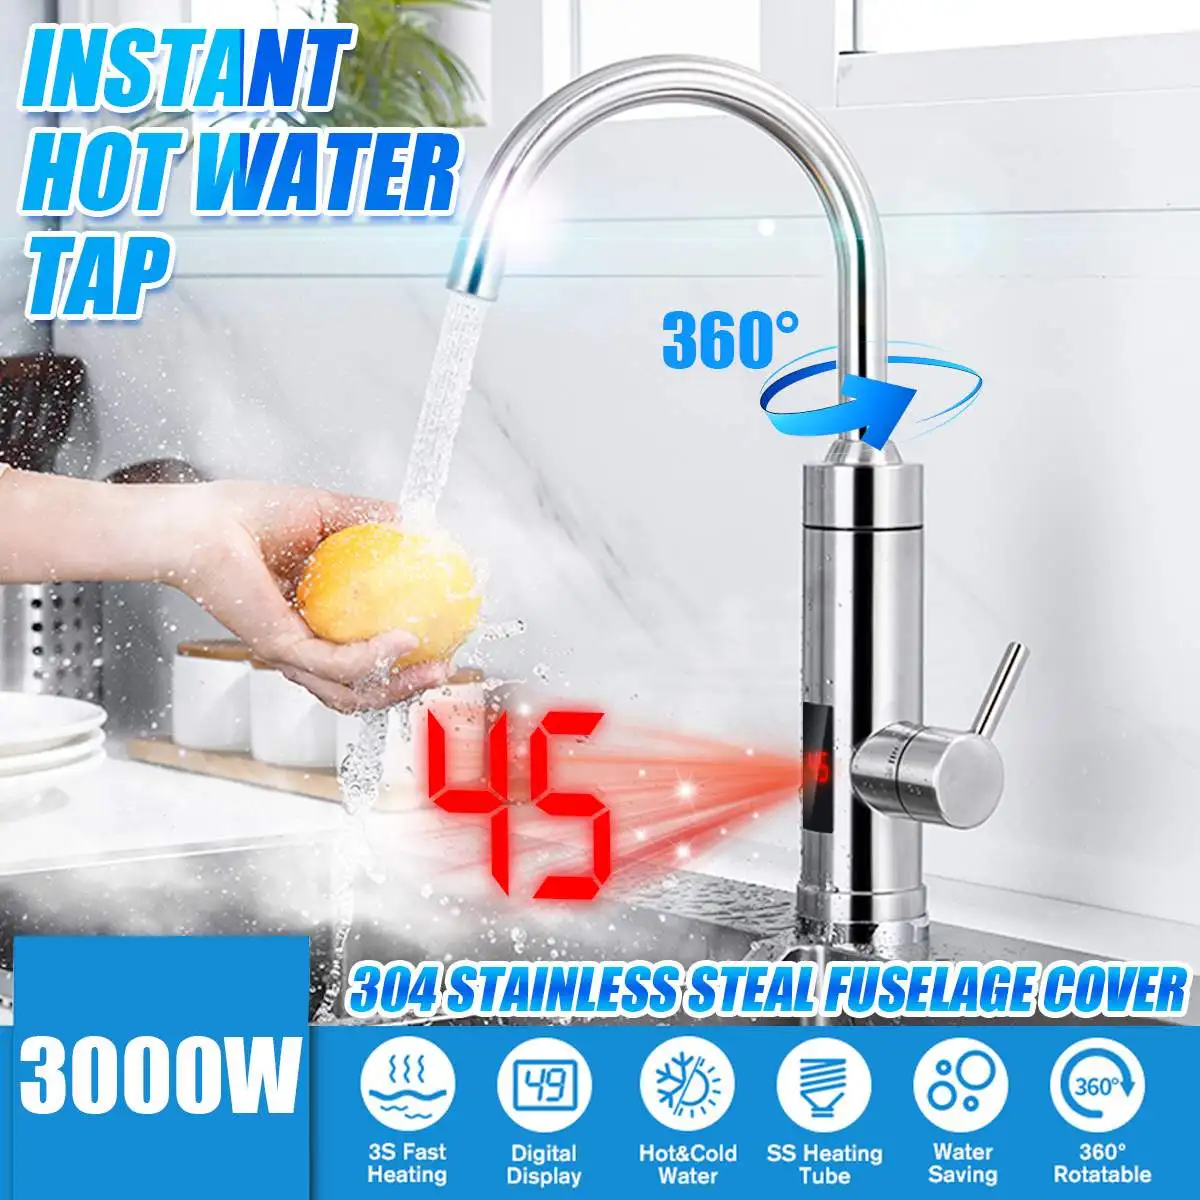 220V 3000W Instant Electric Water Heater Faucet Heaters Hot Water Tap 304 Stainless Steel Shell for Kitchen Bathroom Heating